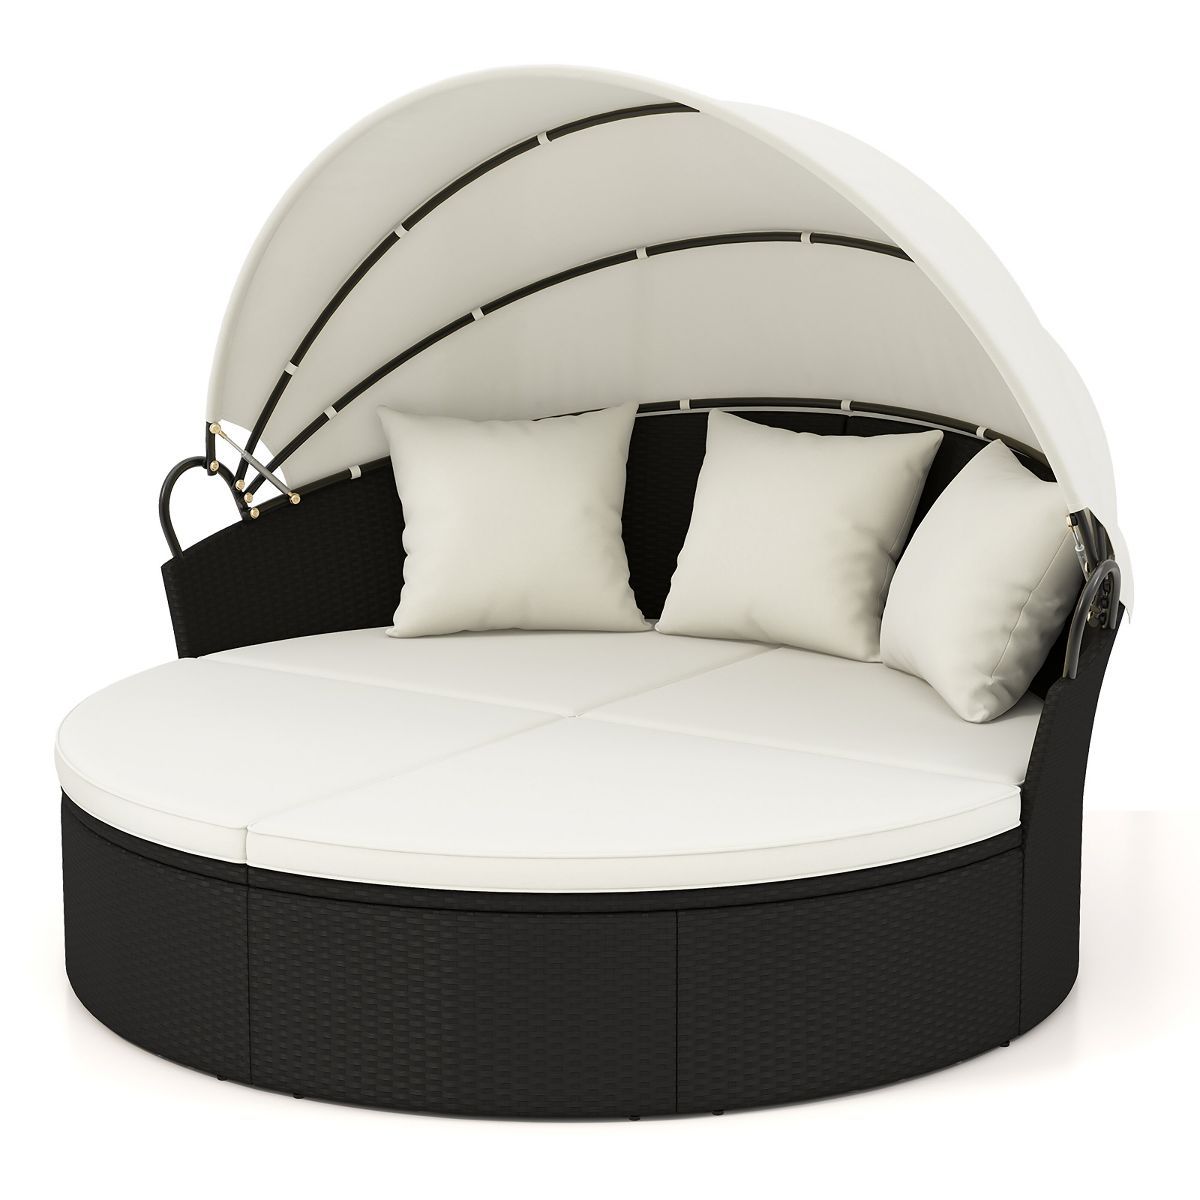 Tangkula Patio Round Daybed Wicker Daybed w/ Retractable Canopy Separated Seating Sectional Sofa | Target